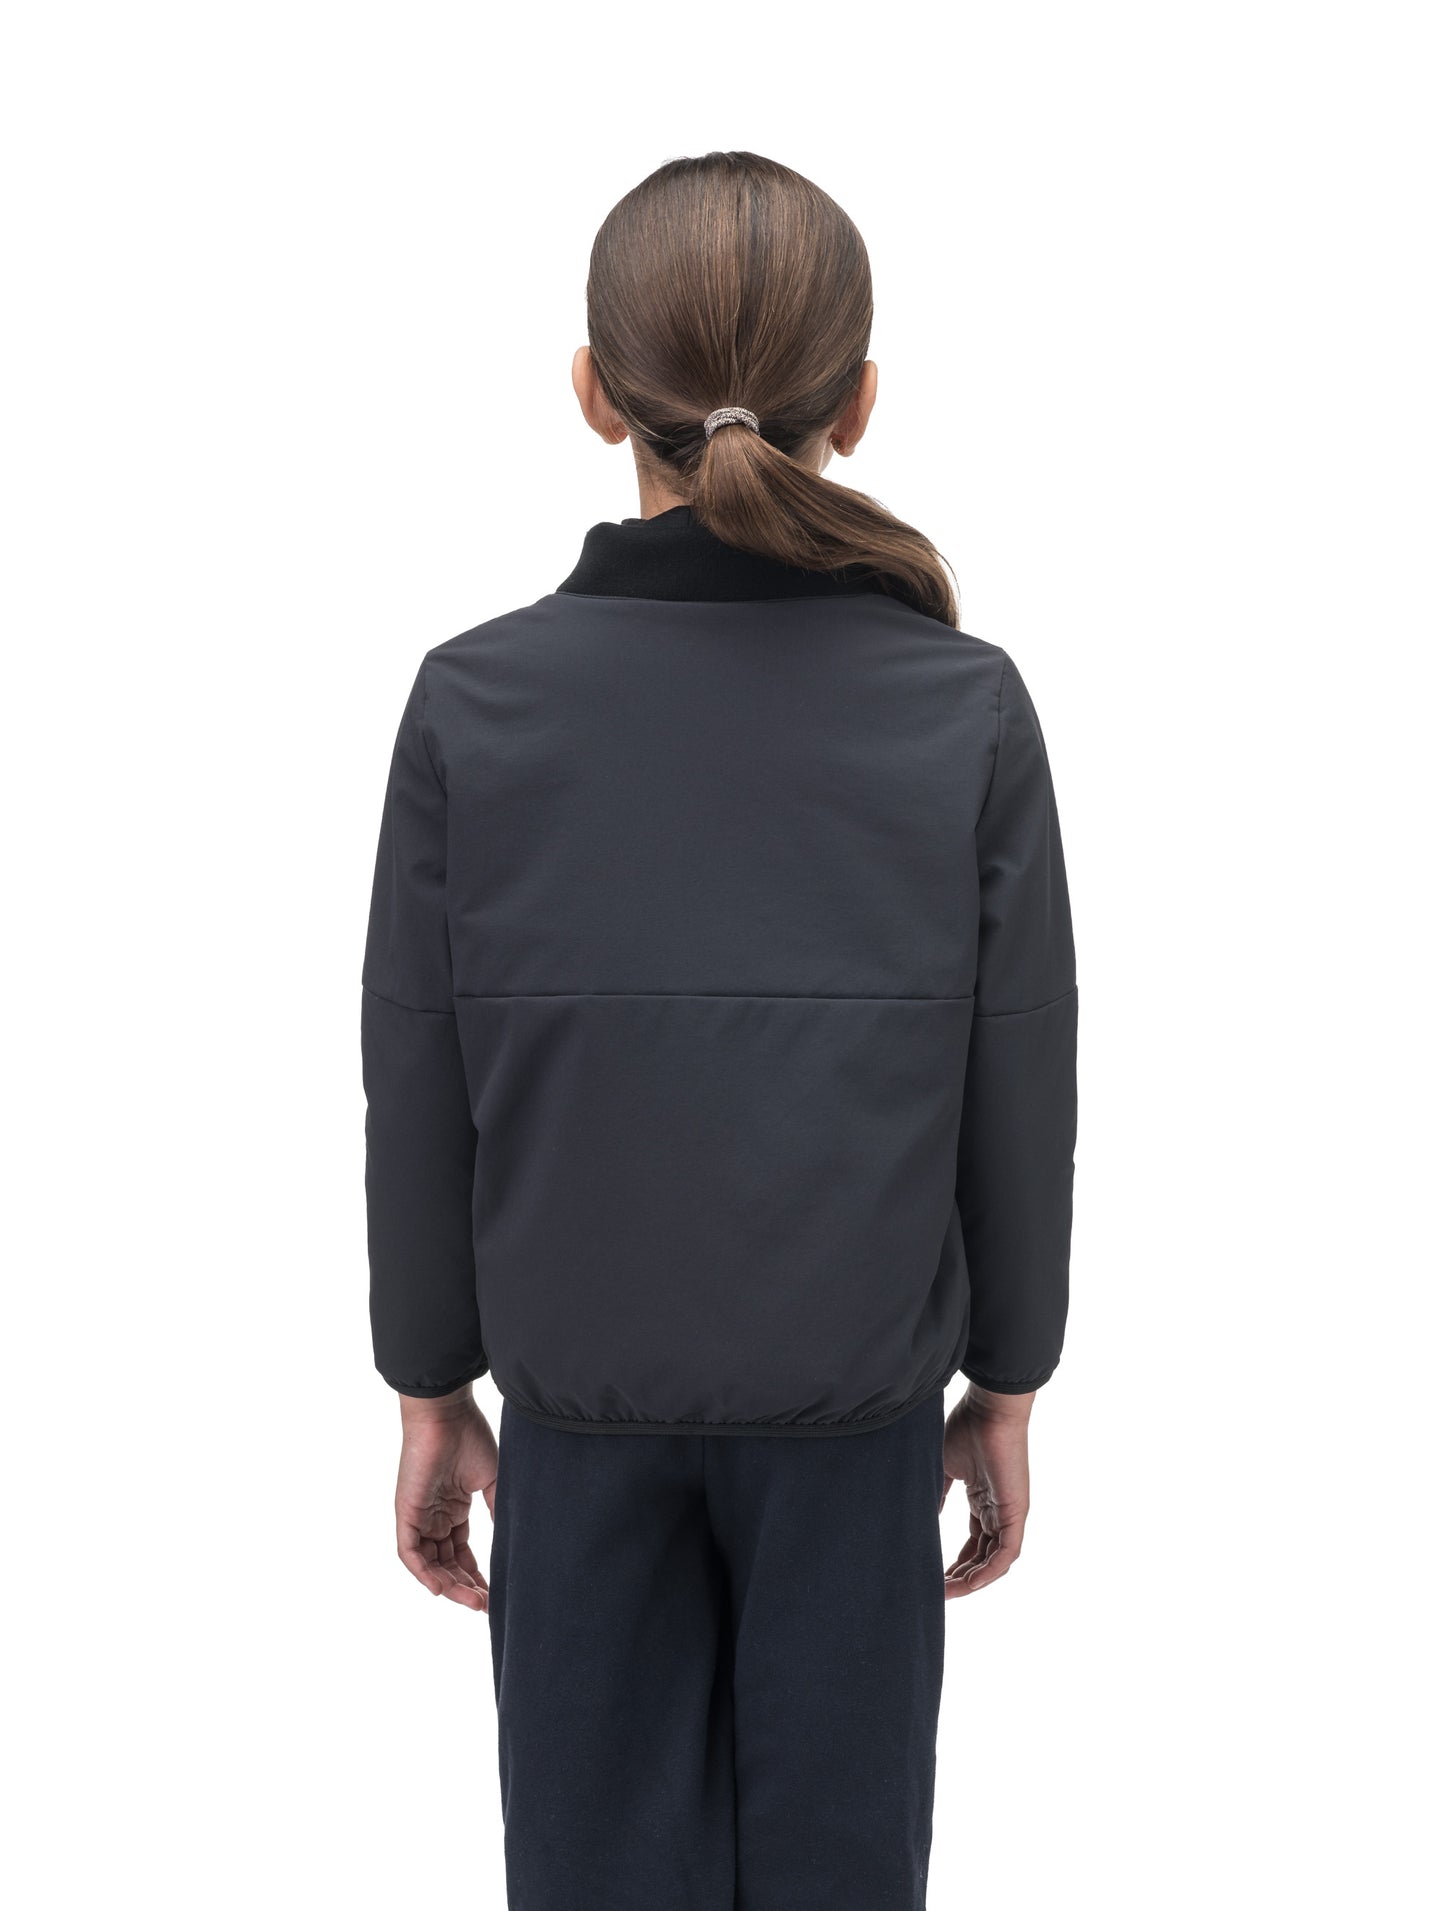 Little Ursa Kids Mid Layer Jacket in hip length, Primaloft Gold Insulation Active, ribbed collar, and two-way front zipper, in Black